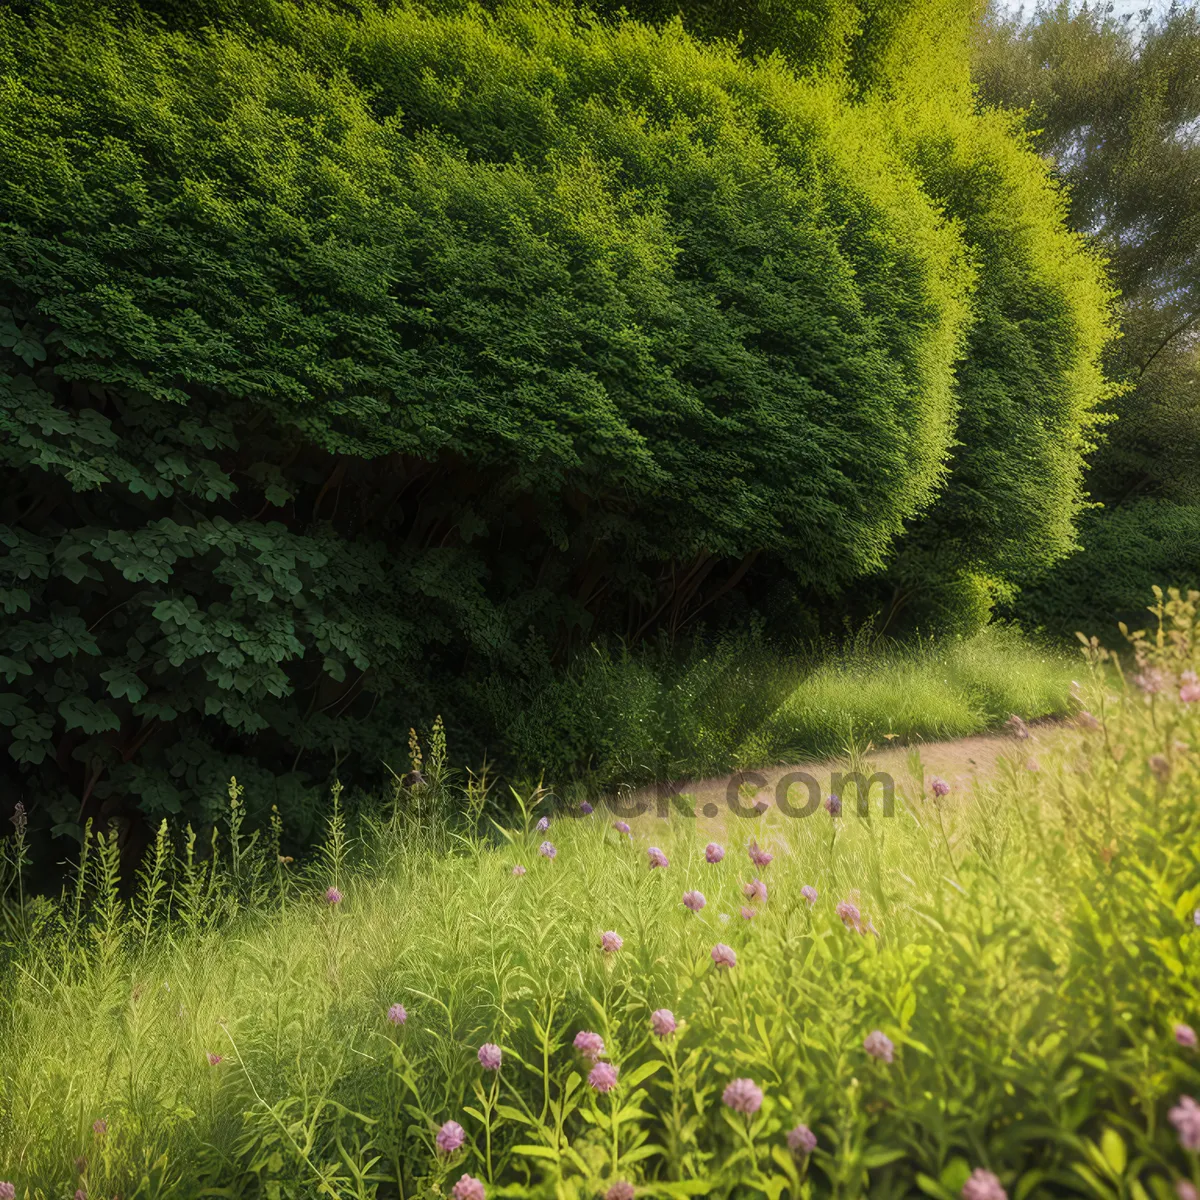 Picture of Serene Summer Willow: Vast Green Meadow Surrounded by Nature's Beauty